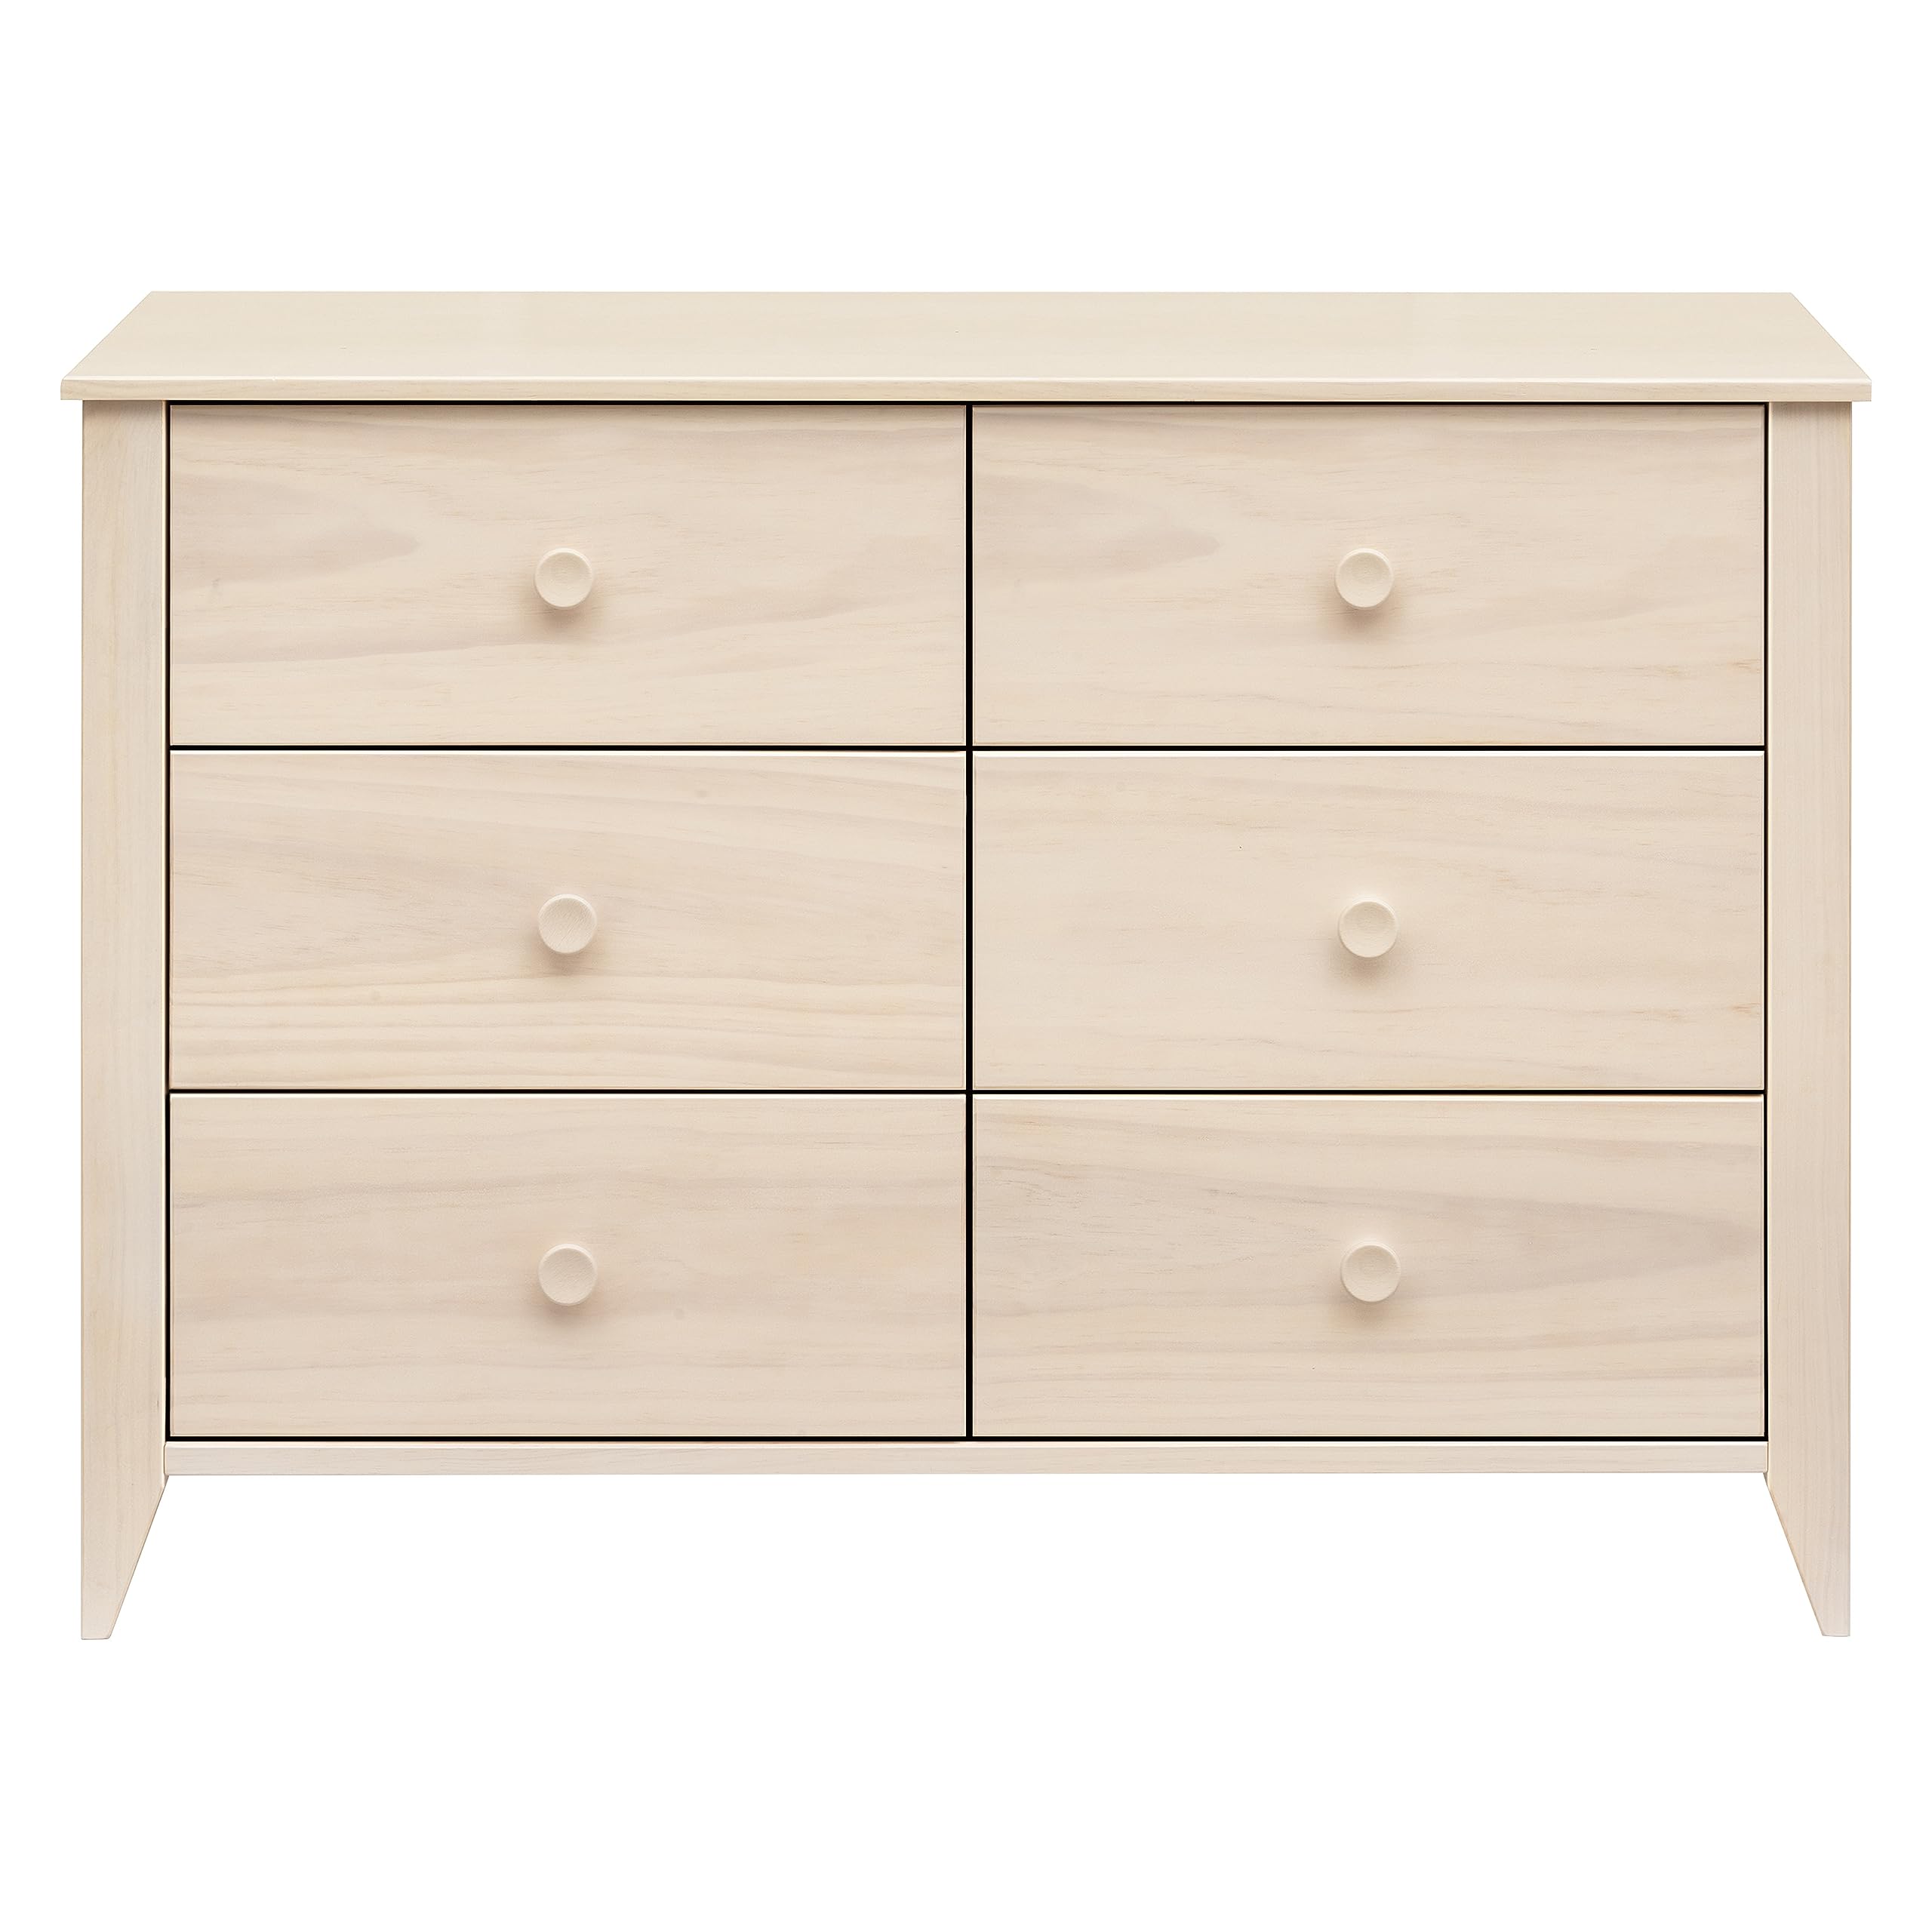 Babyletto Sprout 6-Drawer Double Dresser in Washed Natural, Greenguard Gold Certified